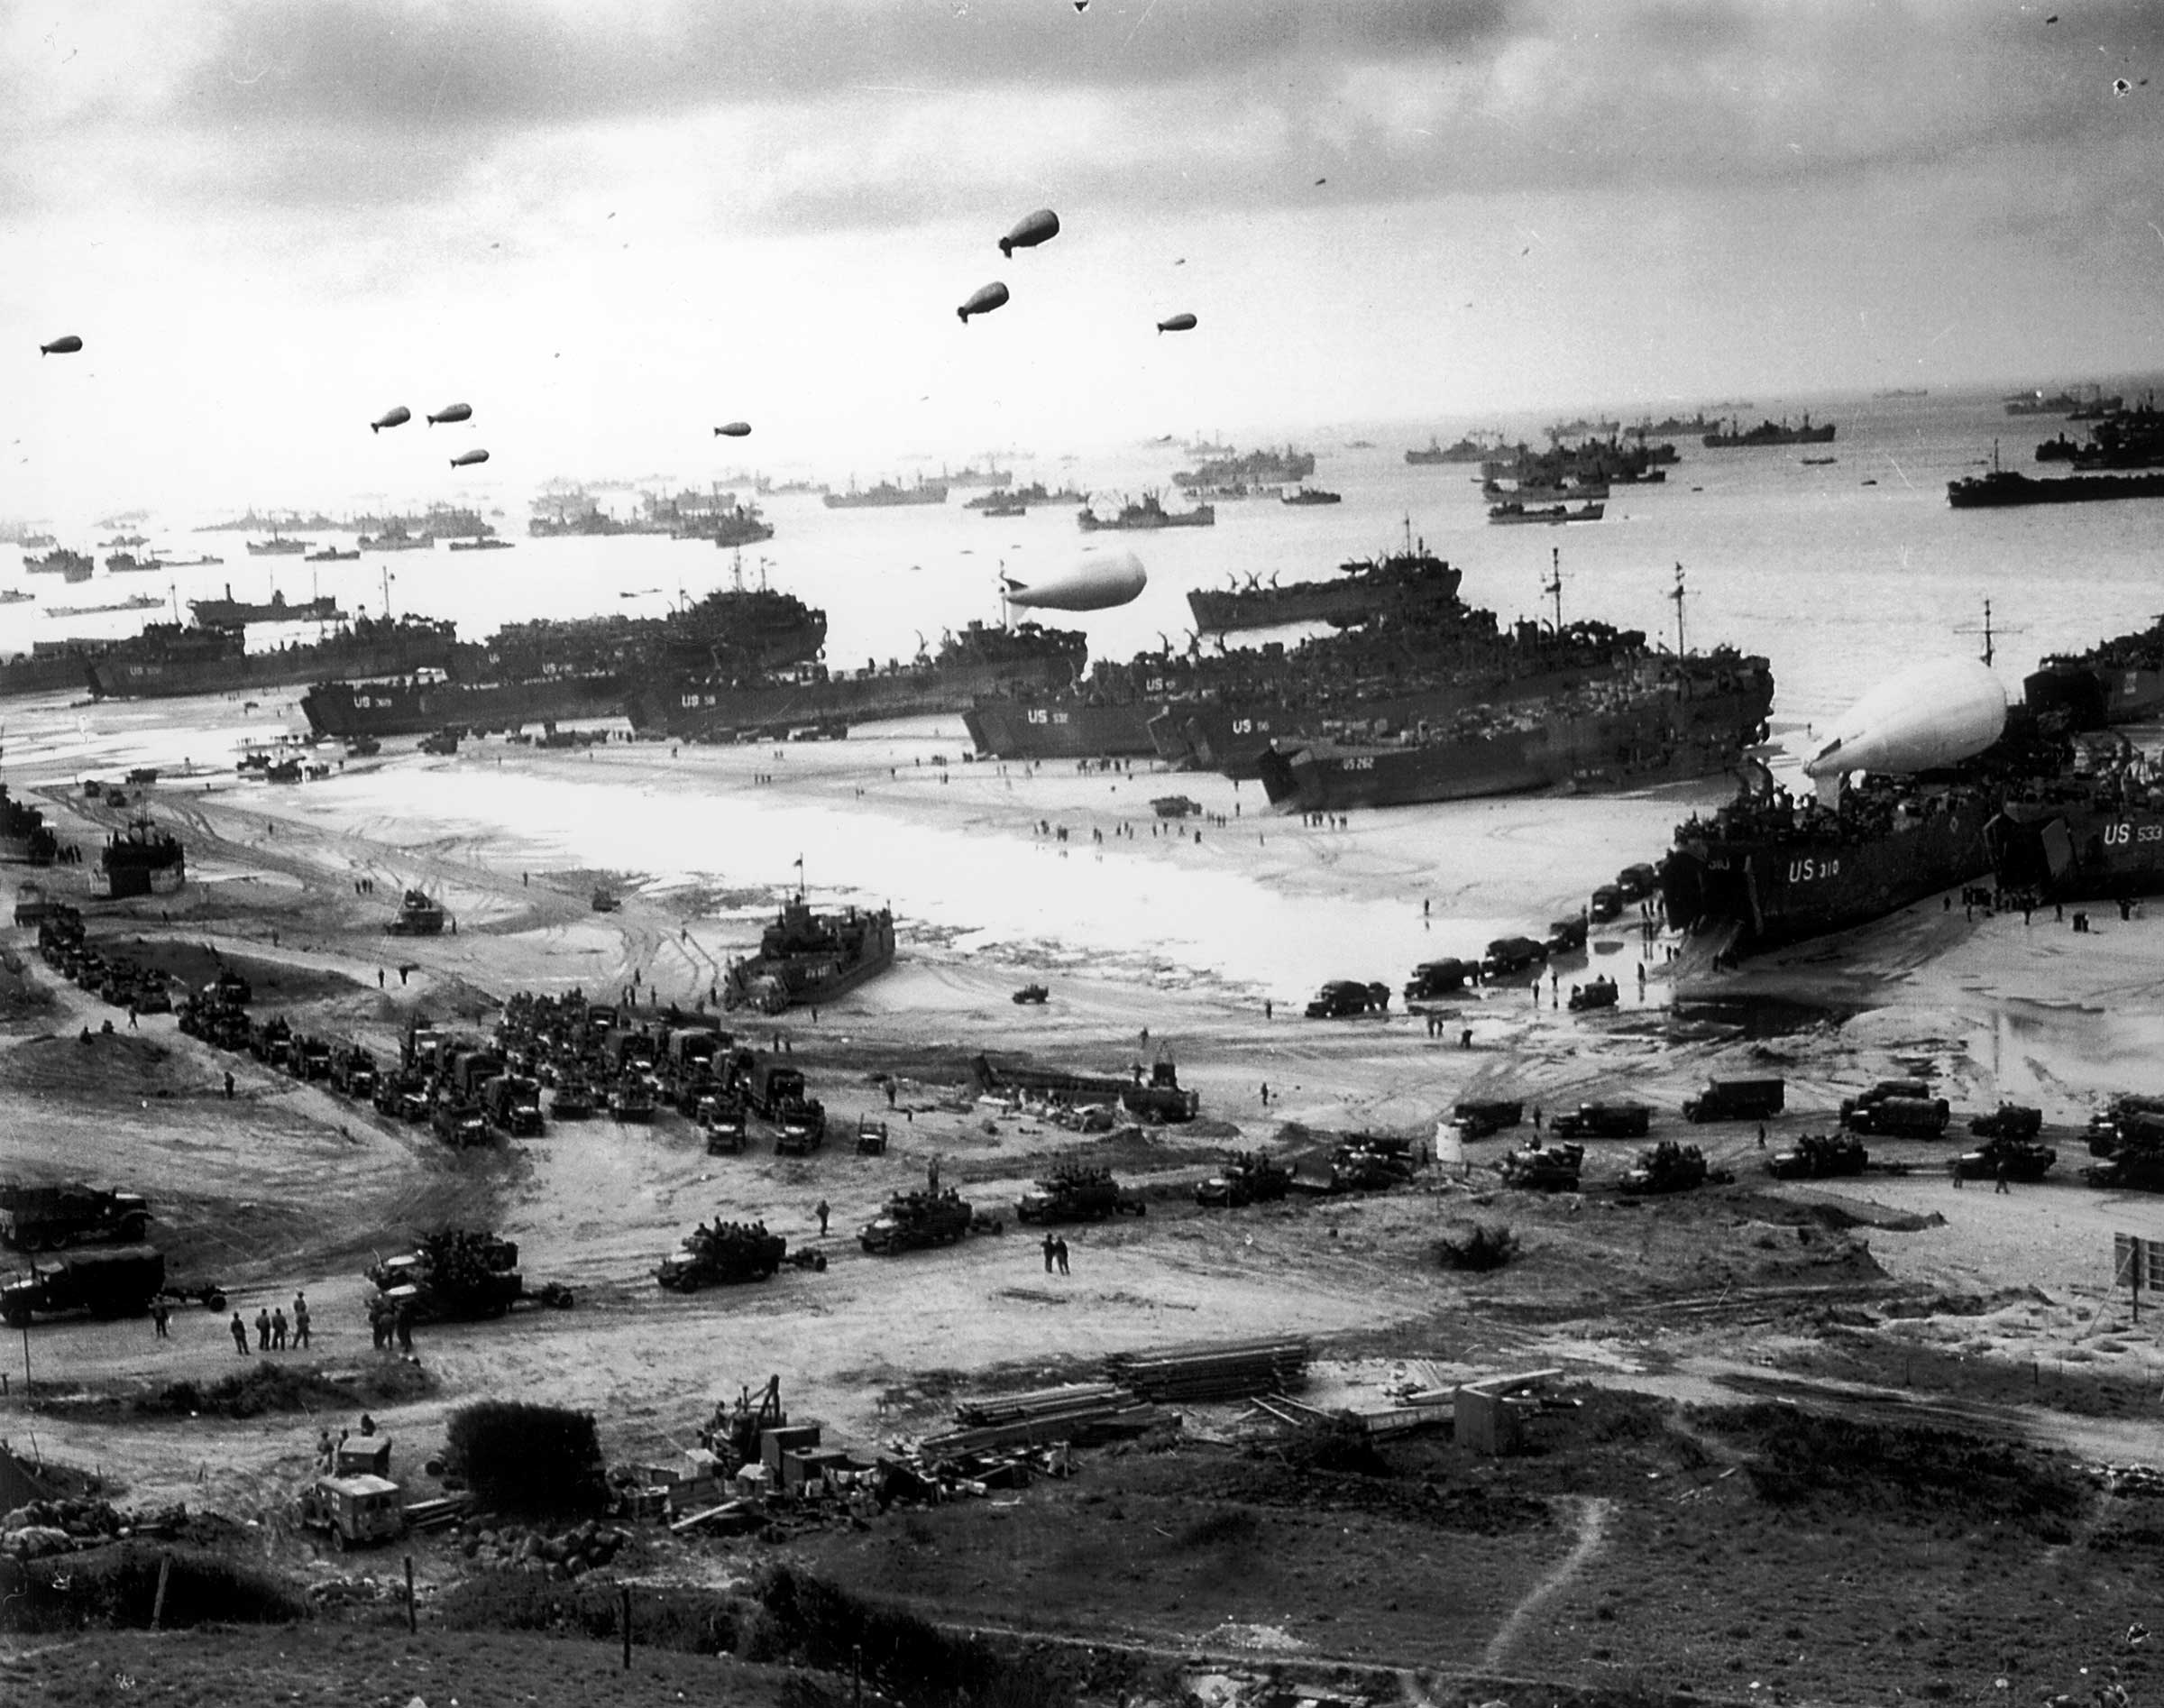 Massive landing and deployment of US troops, supplies and equipment day after D-Day.